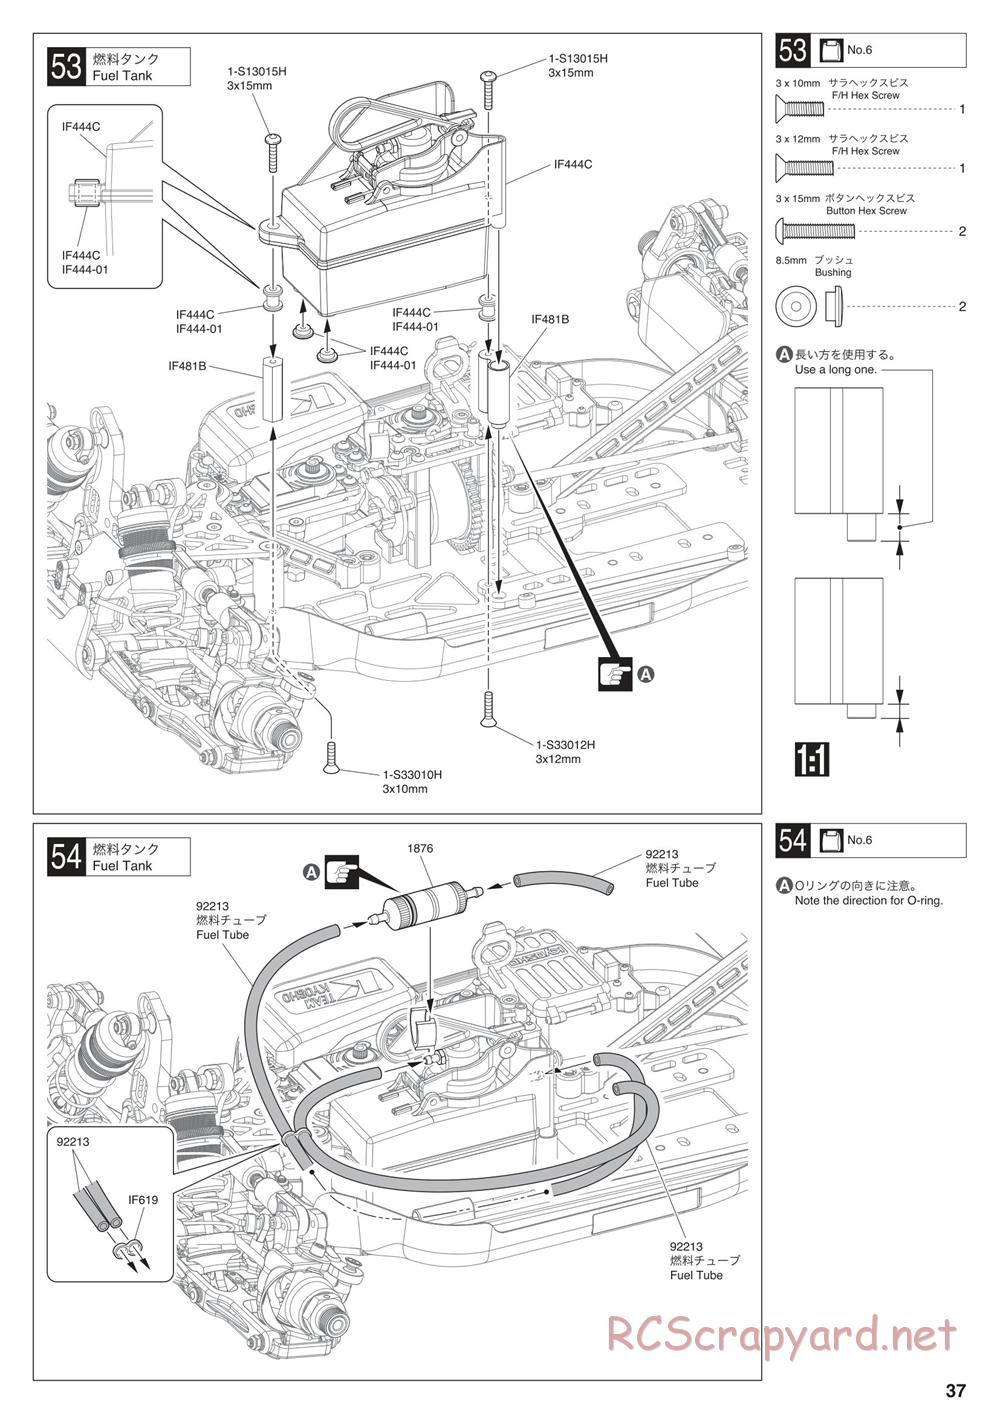 Kyosho - Inferno MP10 - Manual - Page 37